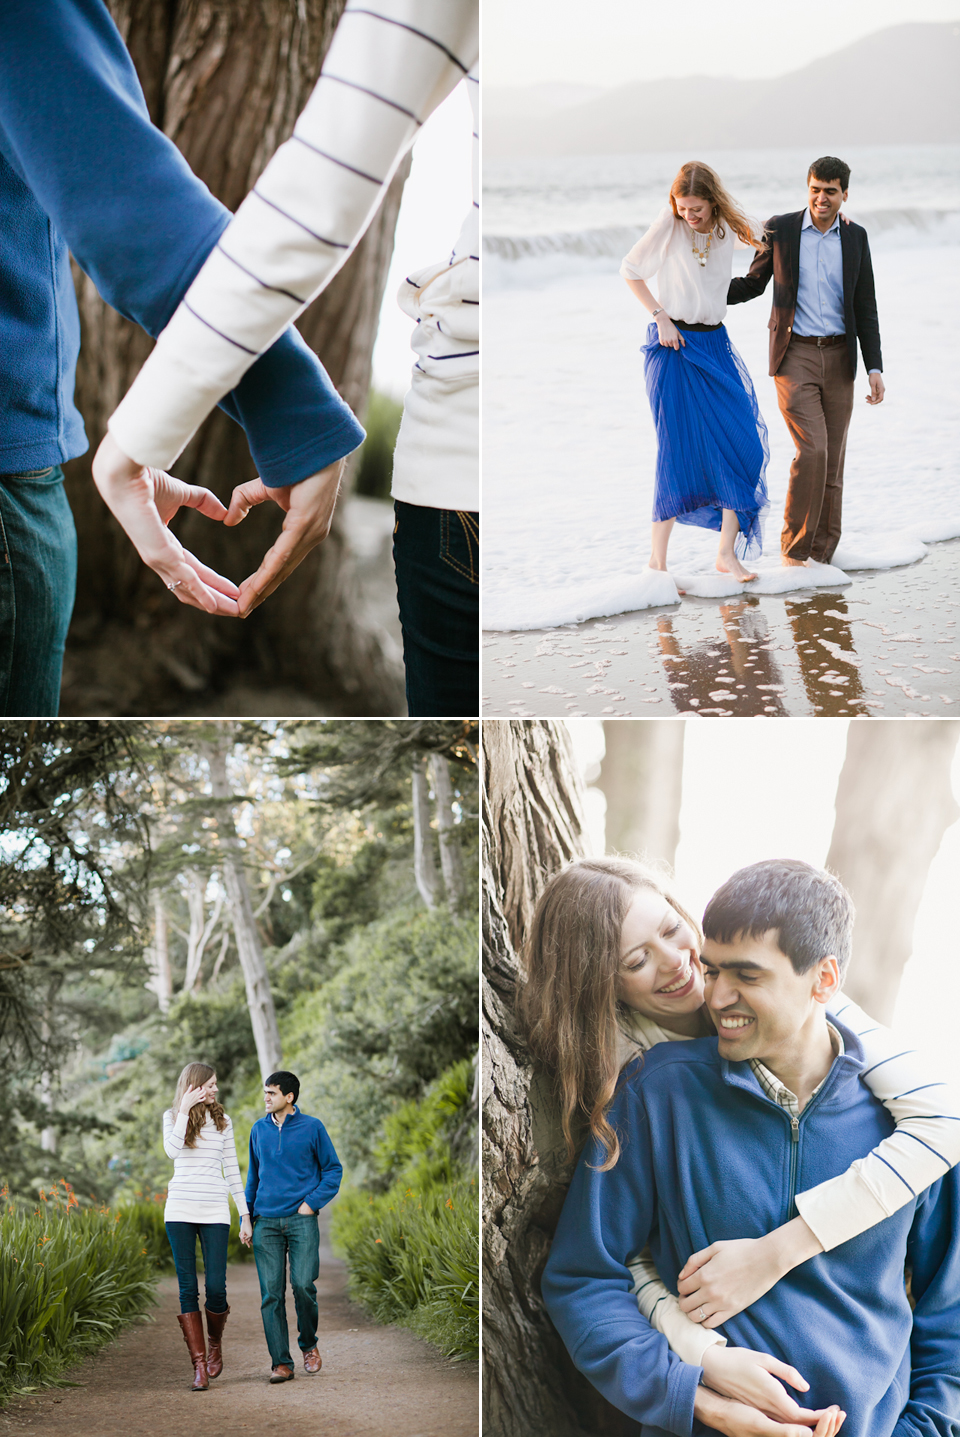 engagement photos on beach, couple walking on beach in water, heart shape with hands, rustic engagement session